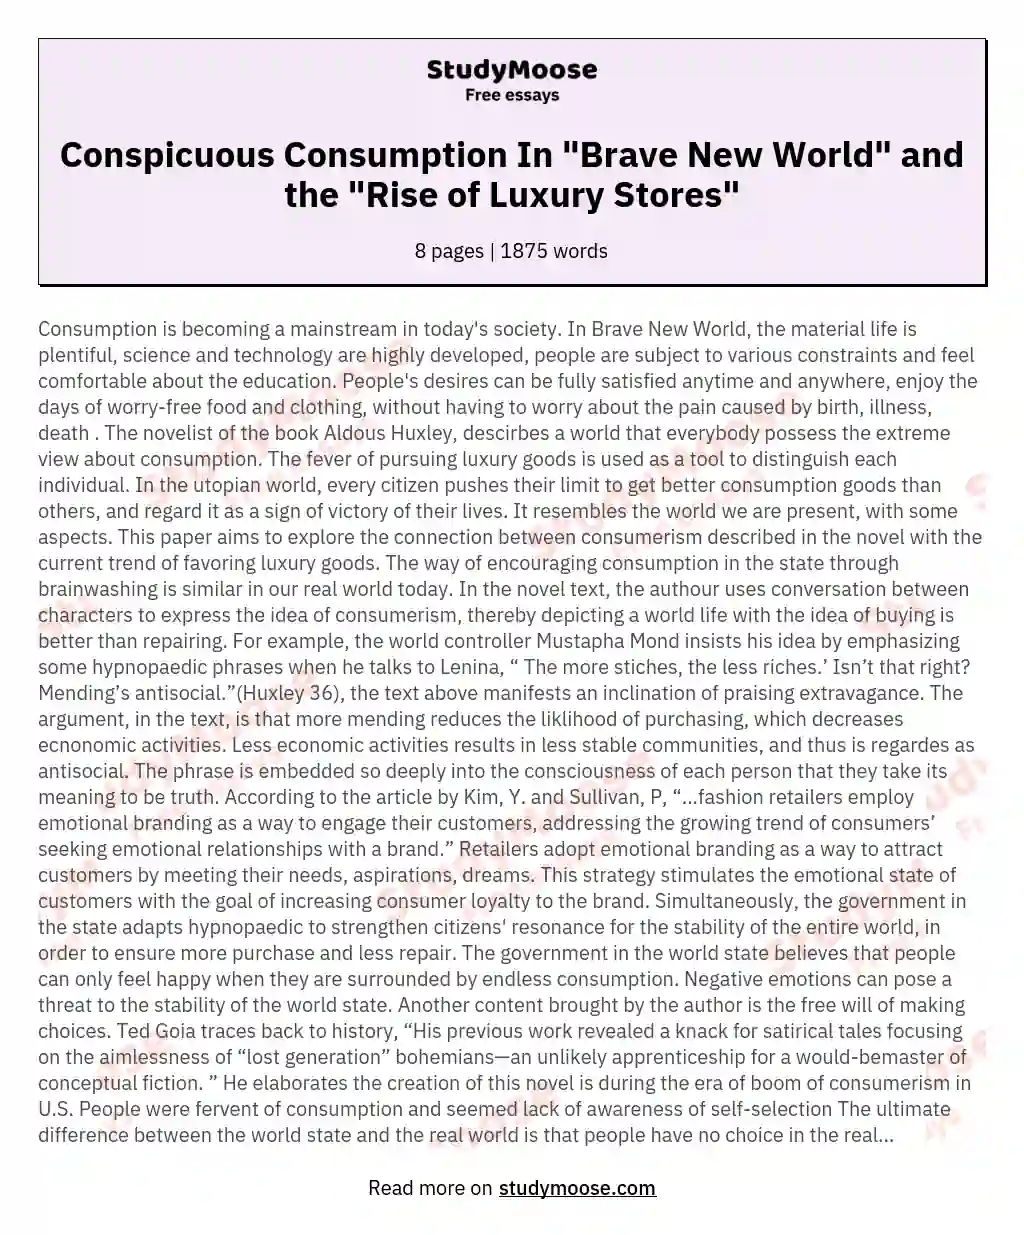 Conspicuous Consumption In "Brave New World" and the "Rise of Luxury Stores"